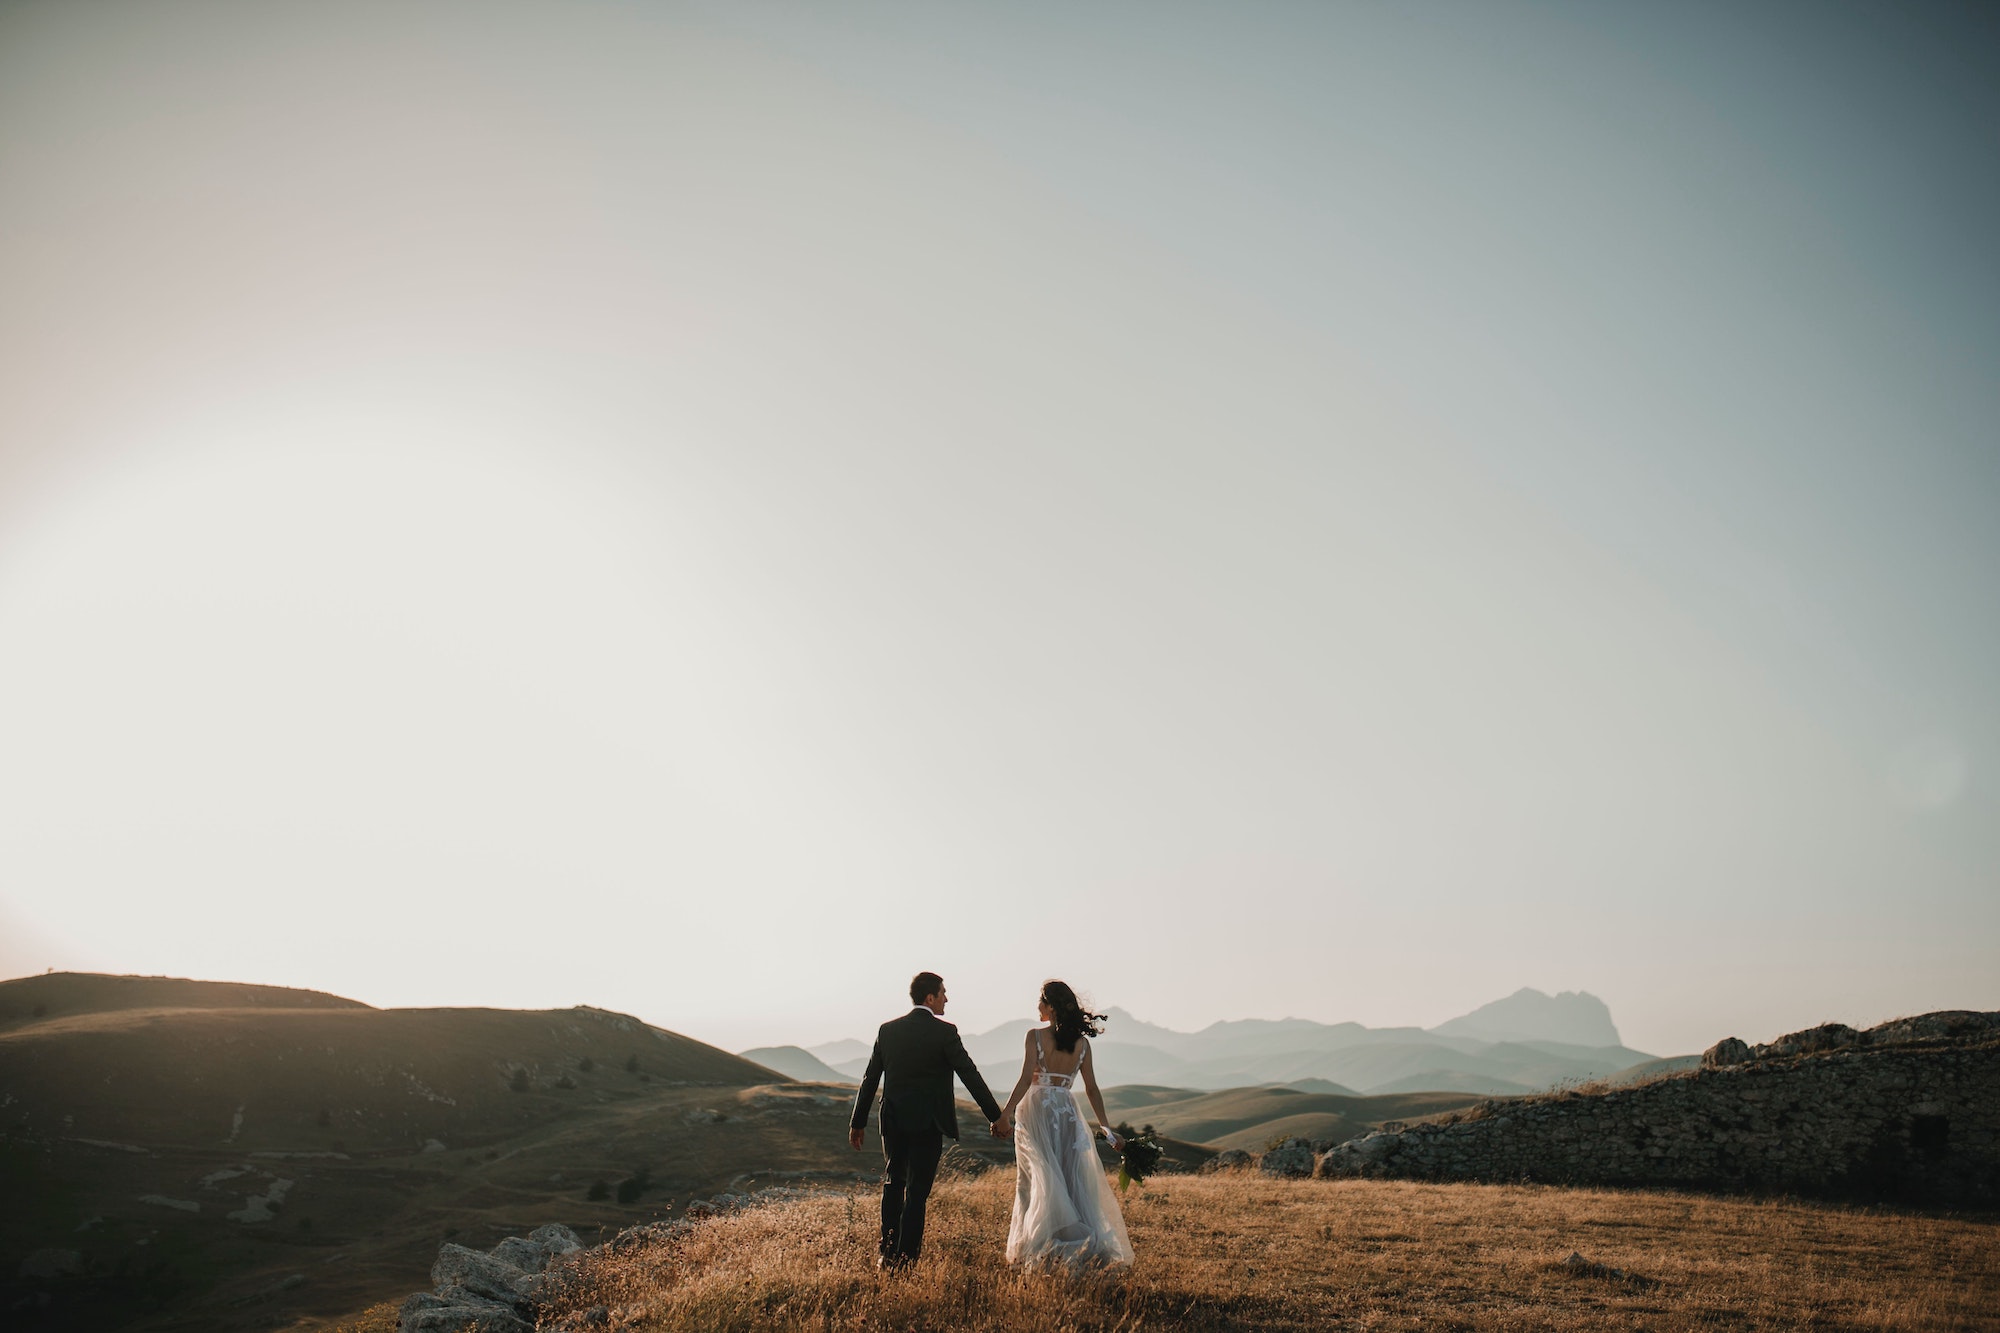 foto pettine IfjHaIoAoqE unsplash - What is the ‘golden hour’ and how can you make the most of it?